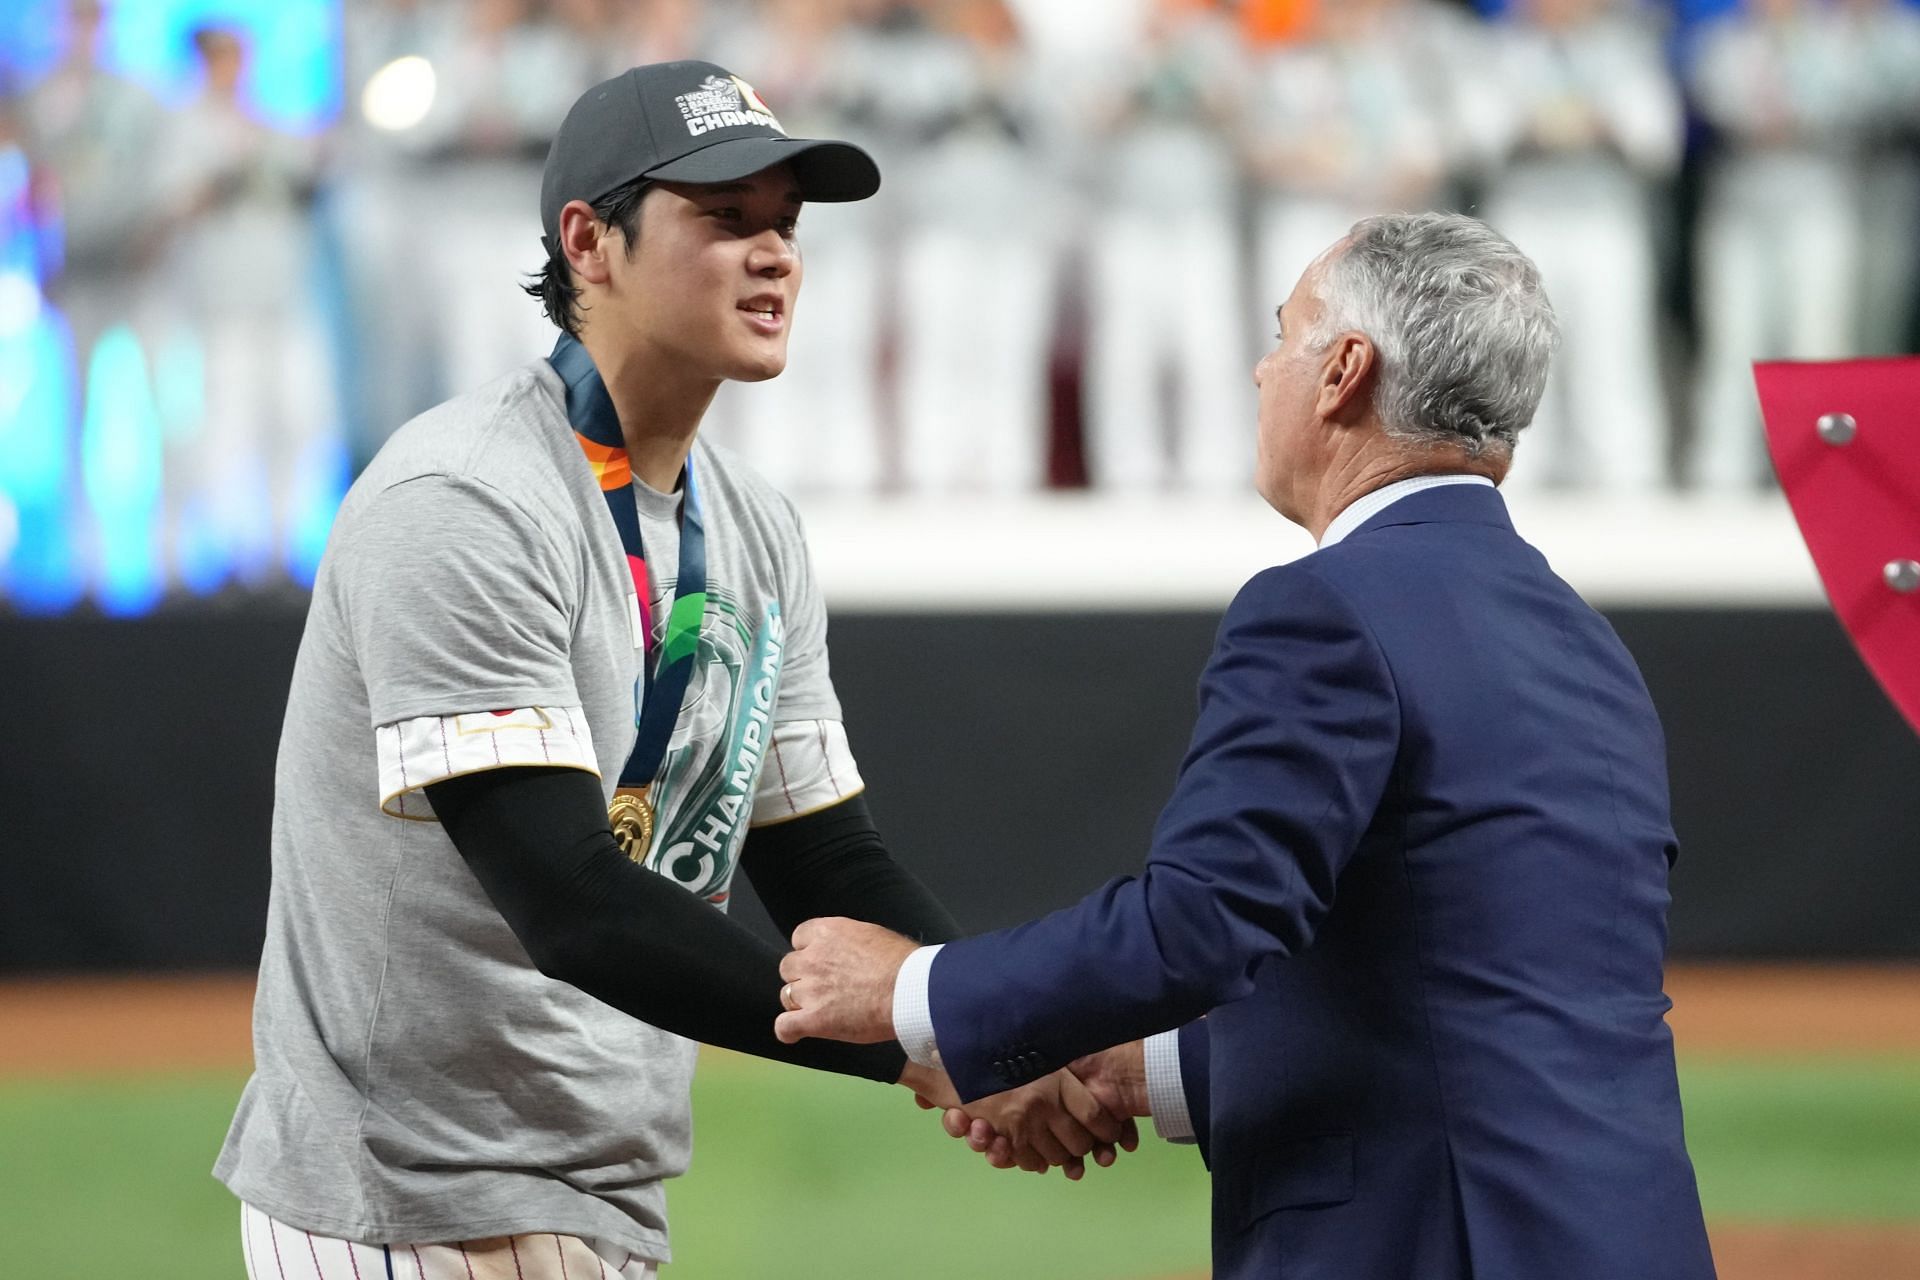 Shohei Ohtani is presented the medal after defeating Team USA during the WBC Championship at loanDepot park